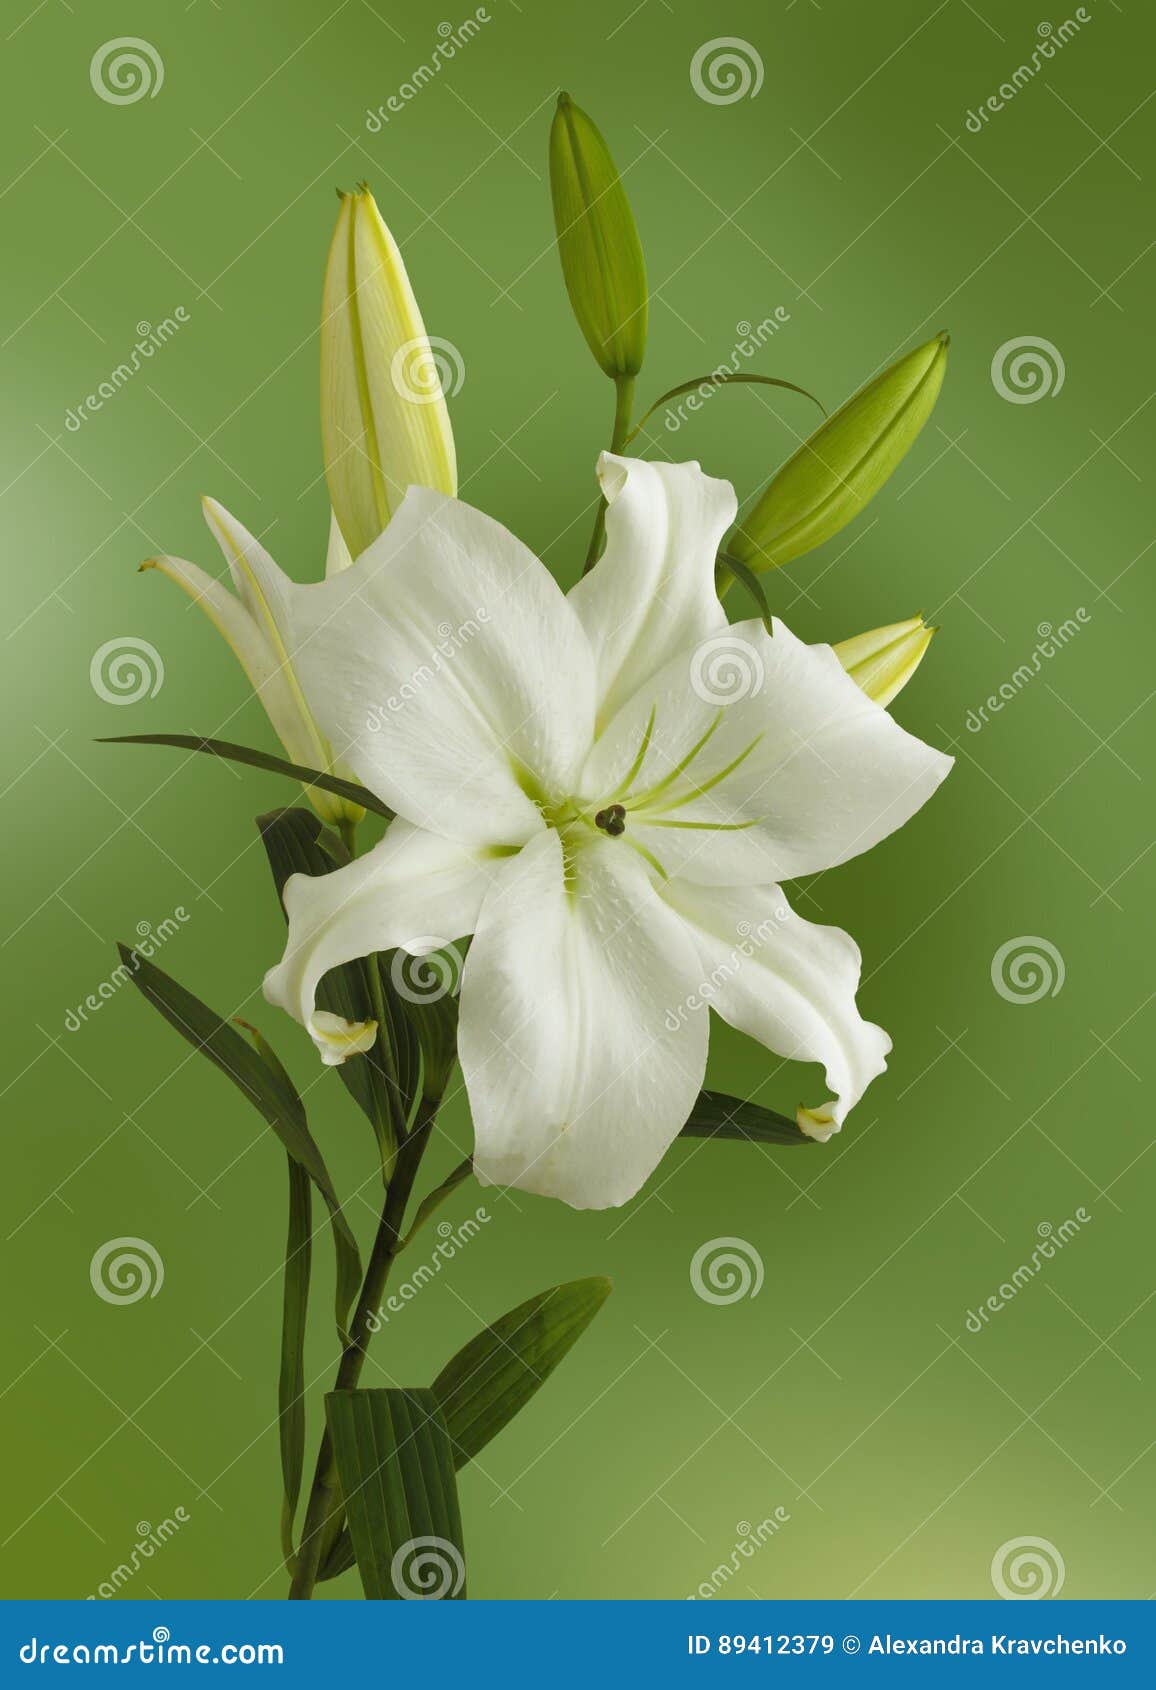 White lilies on the green background